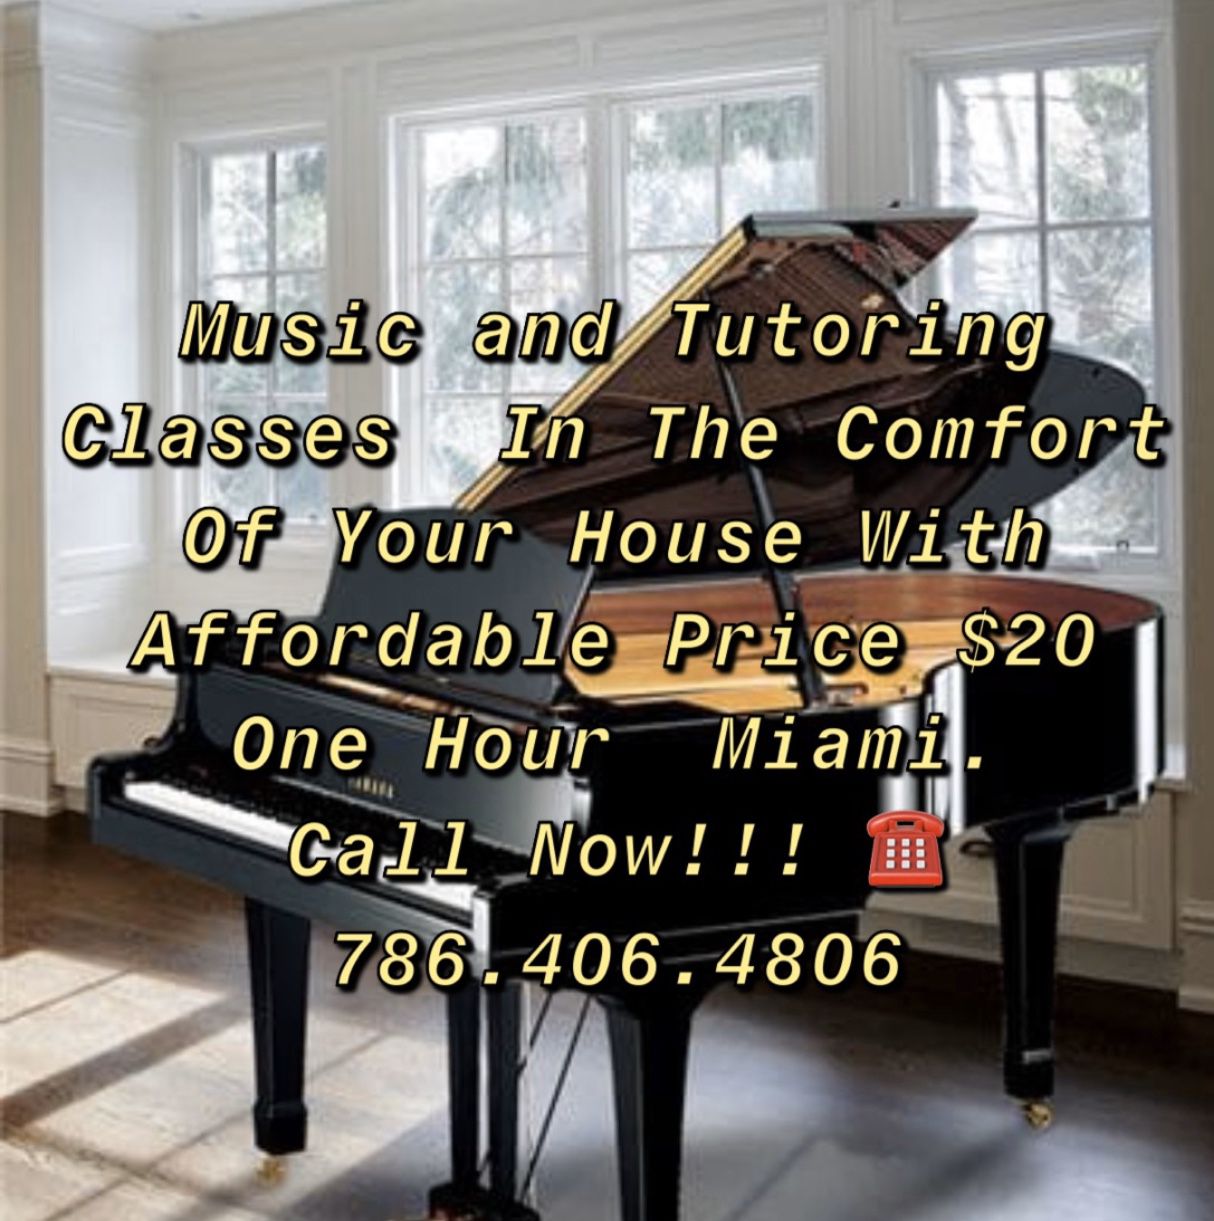 MUSIC AND TUTORING CLASSES